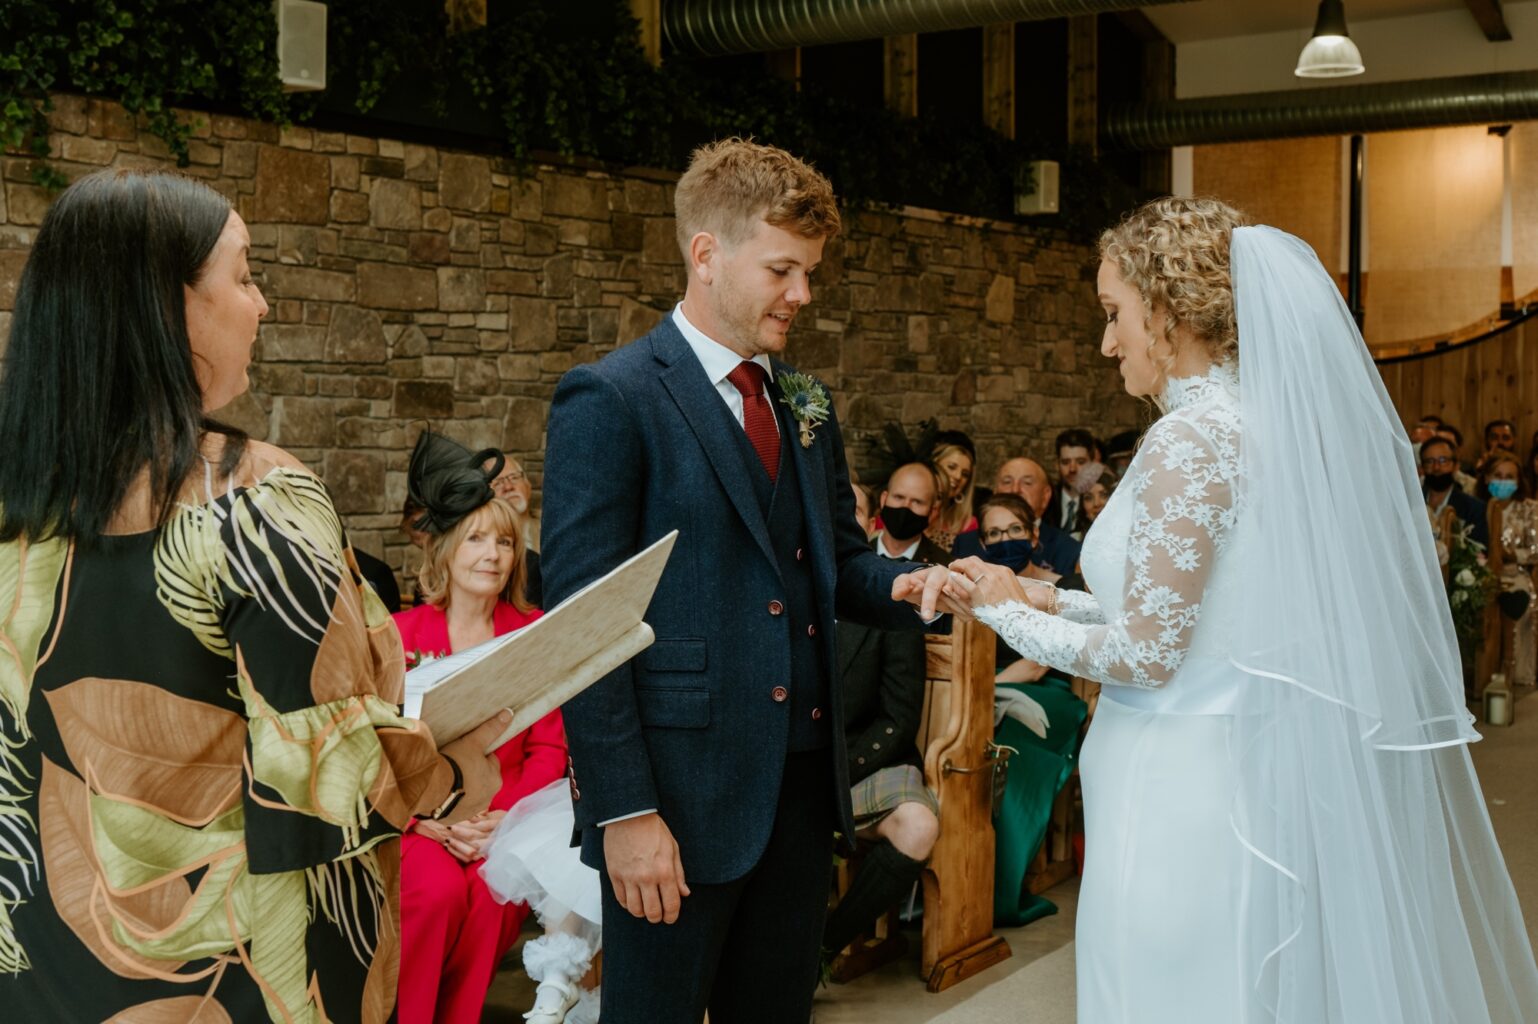 bride wearing white dress placing wedding ring on grooms finger at ceremony in barn wedding venue scotland cairns farm estate wedding